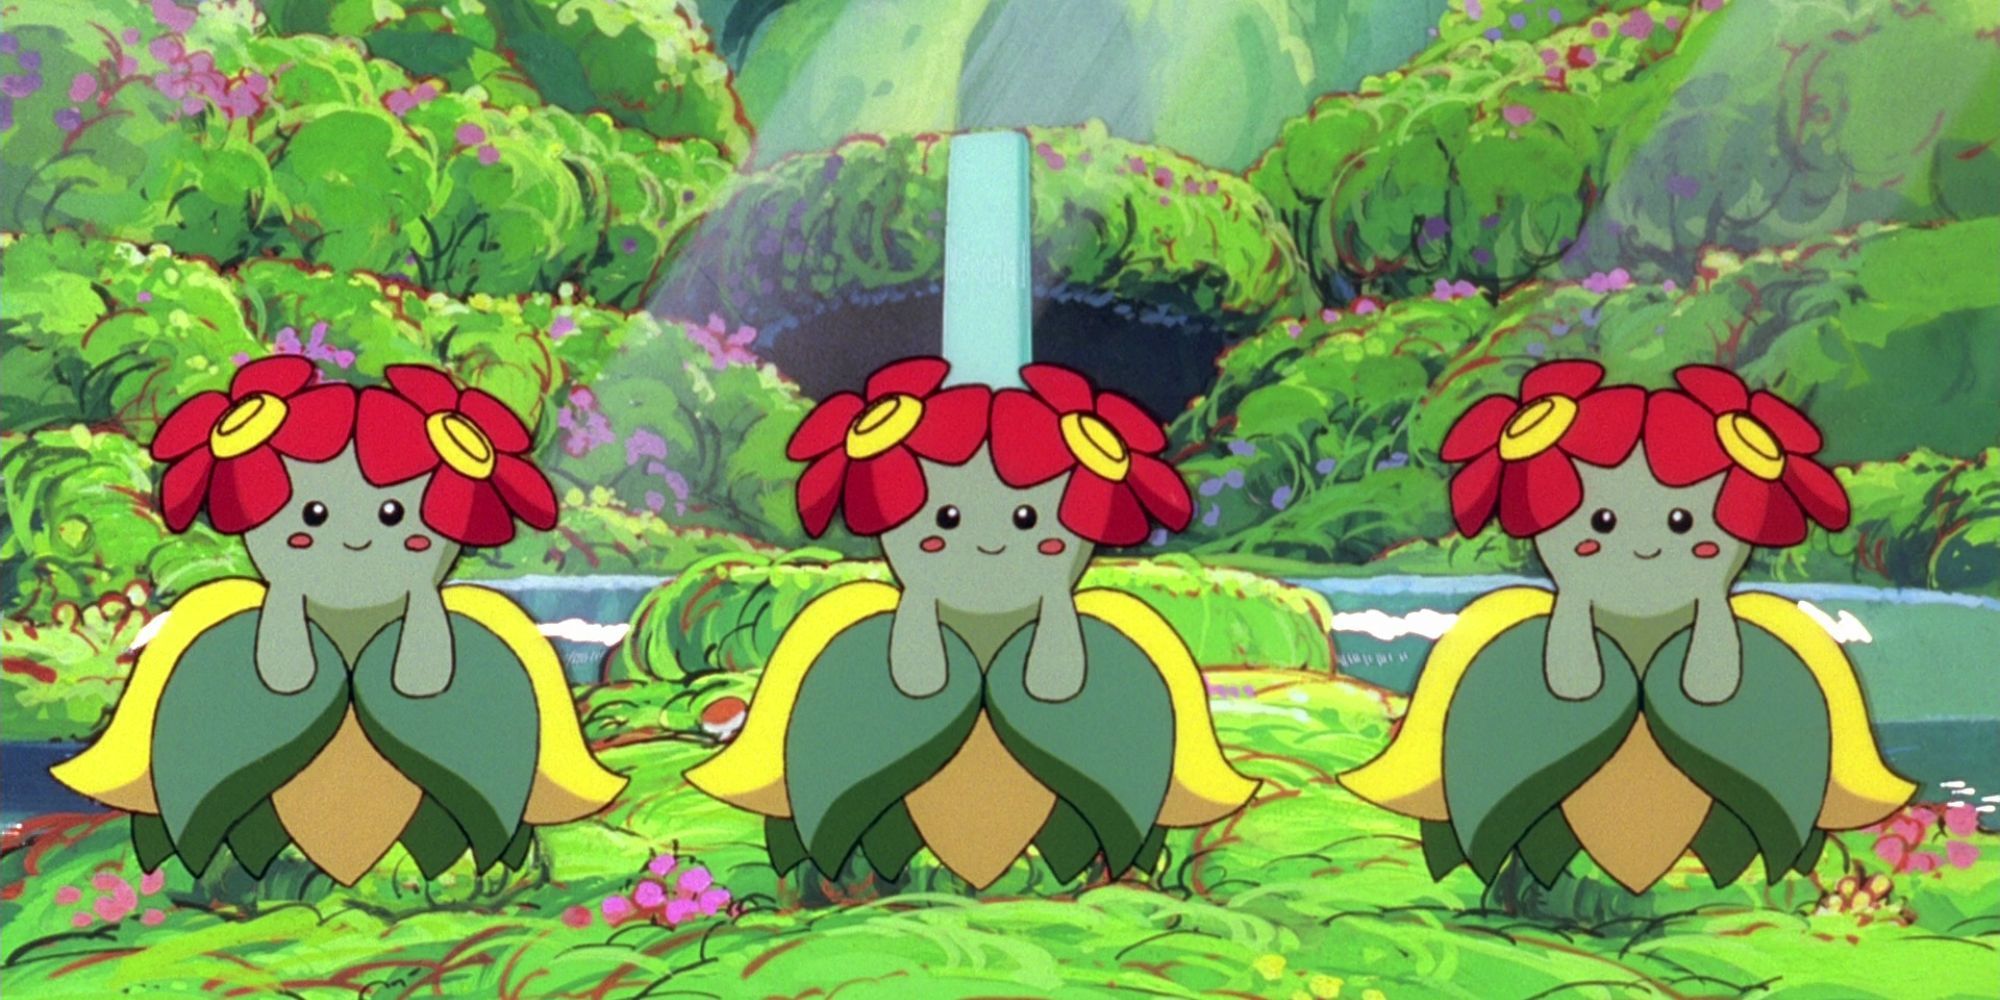 Three Bellossom stand together in front of a waterfall